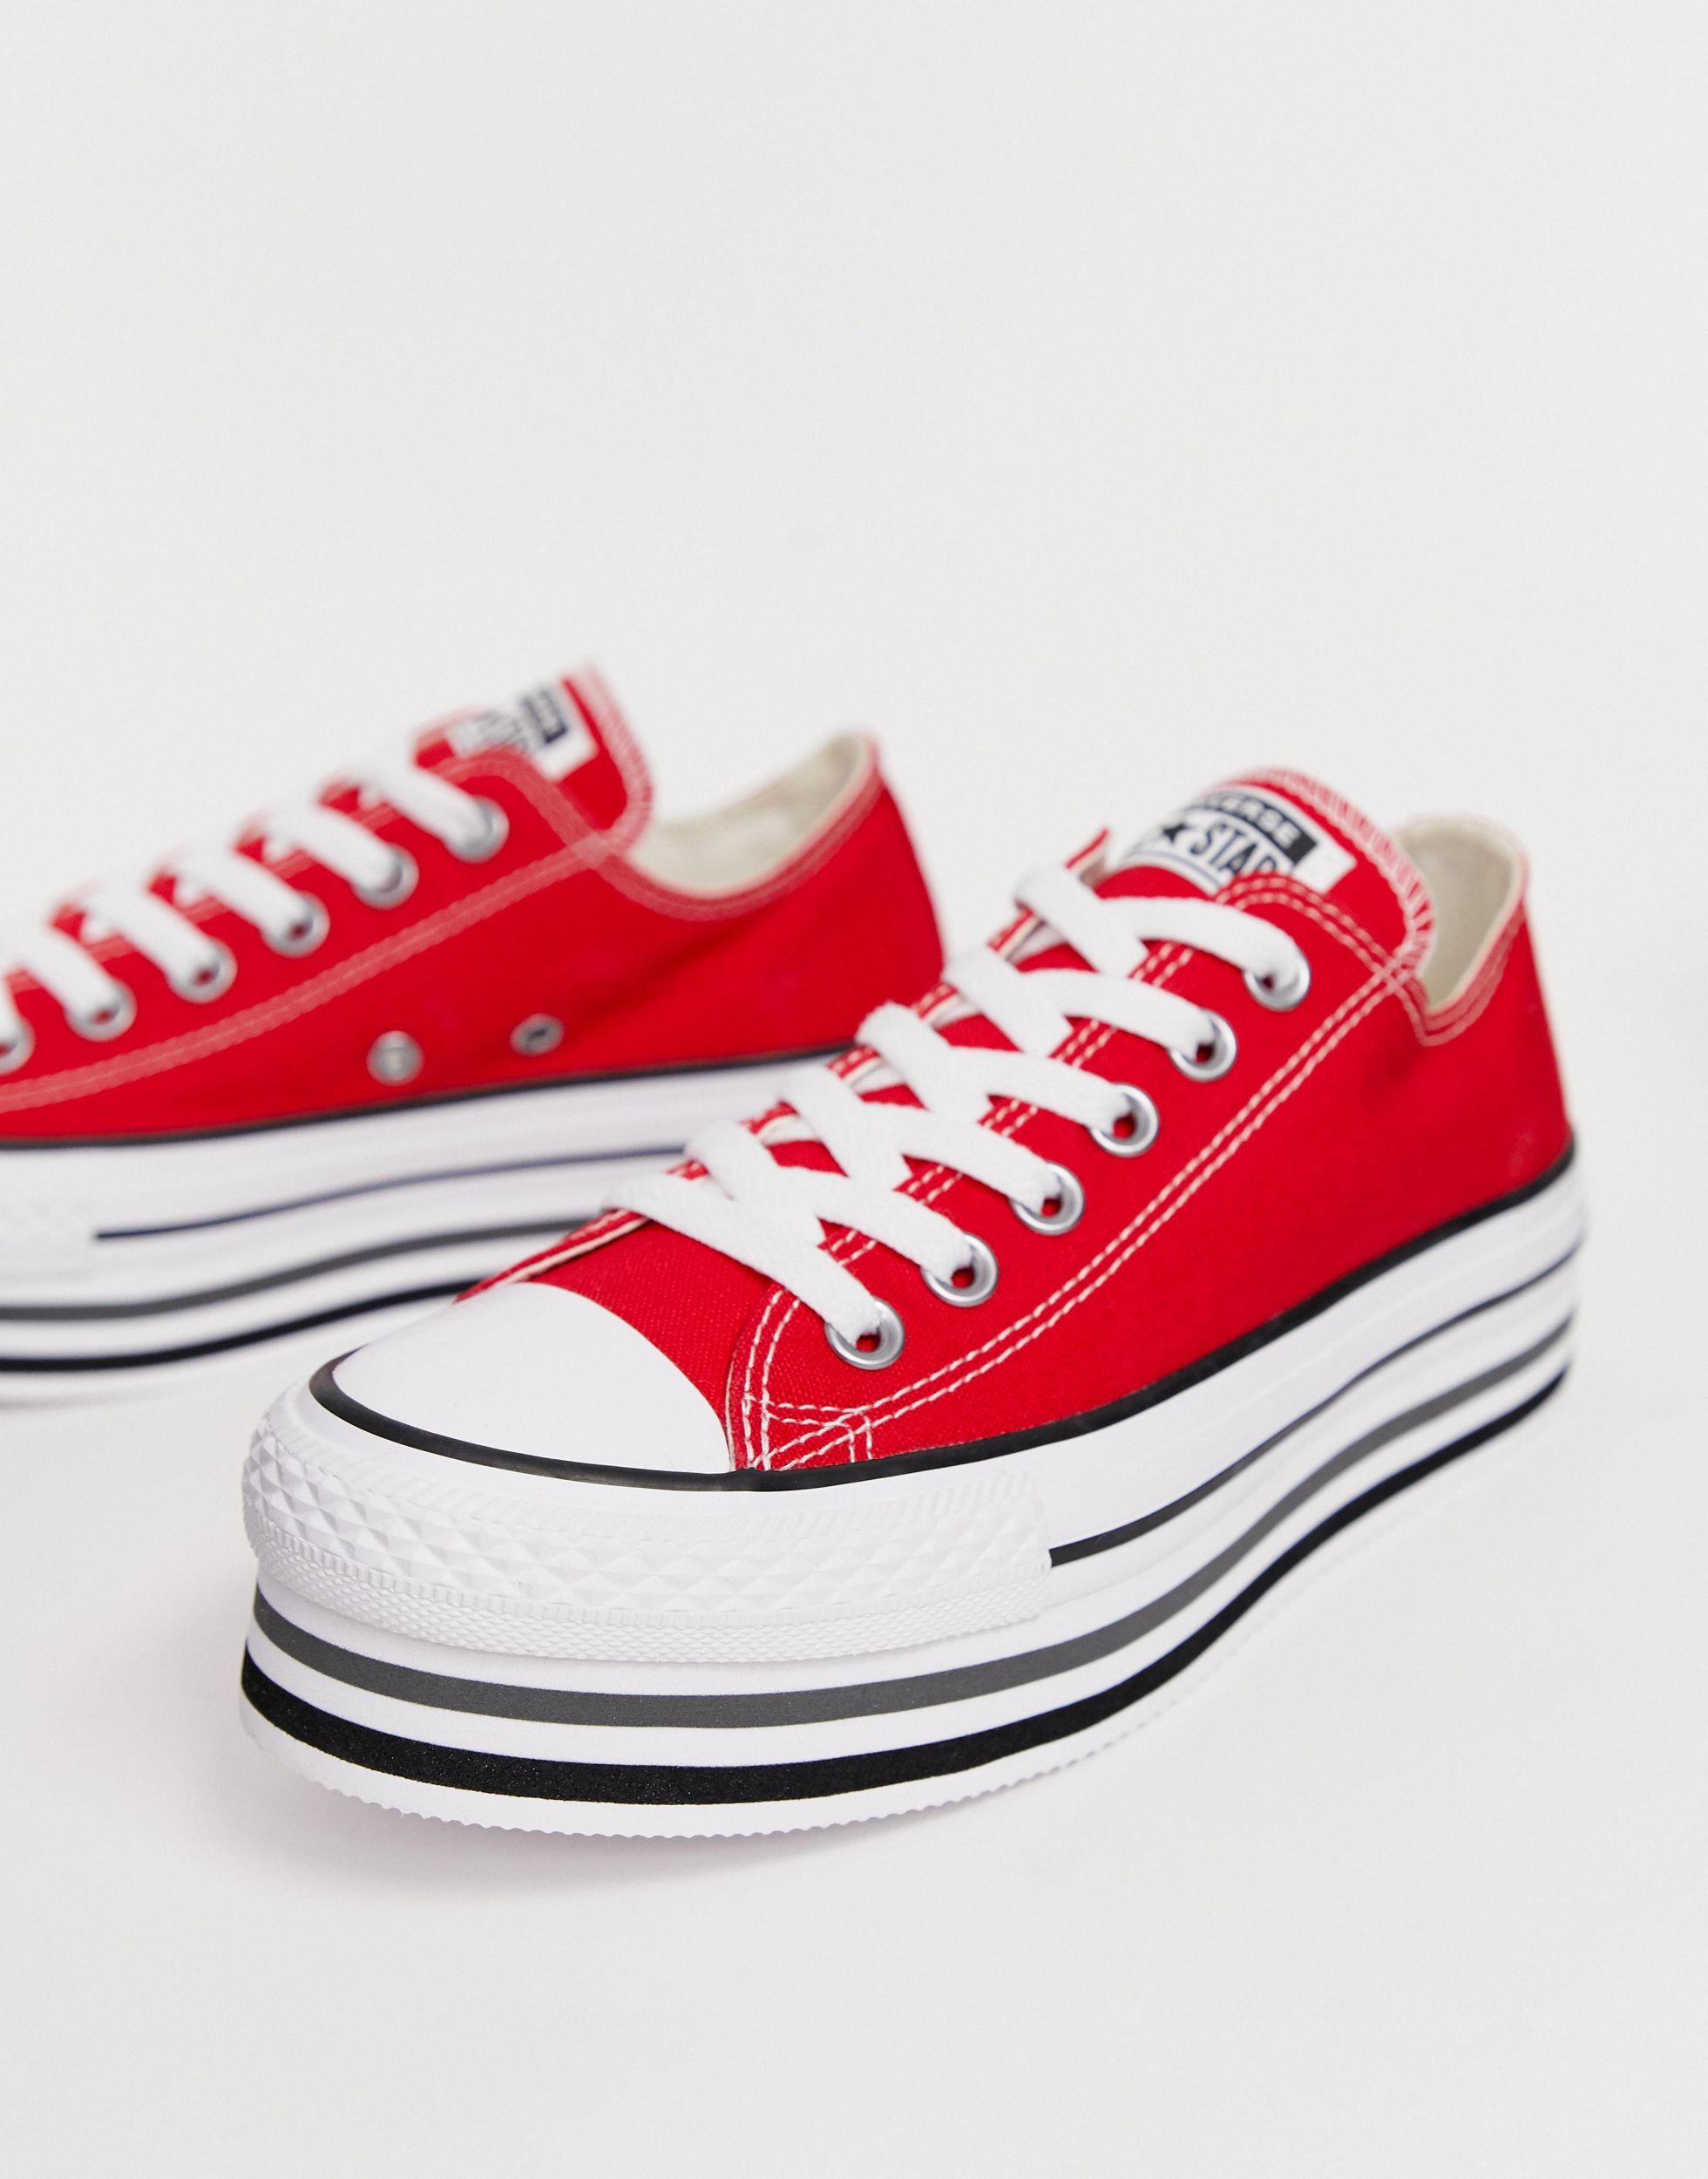 Afsnit farvel konstruktion Converse Chuck Taylor All Star Platform Layer Red Trainers | Lyst